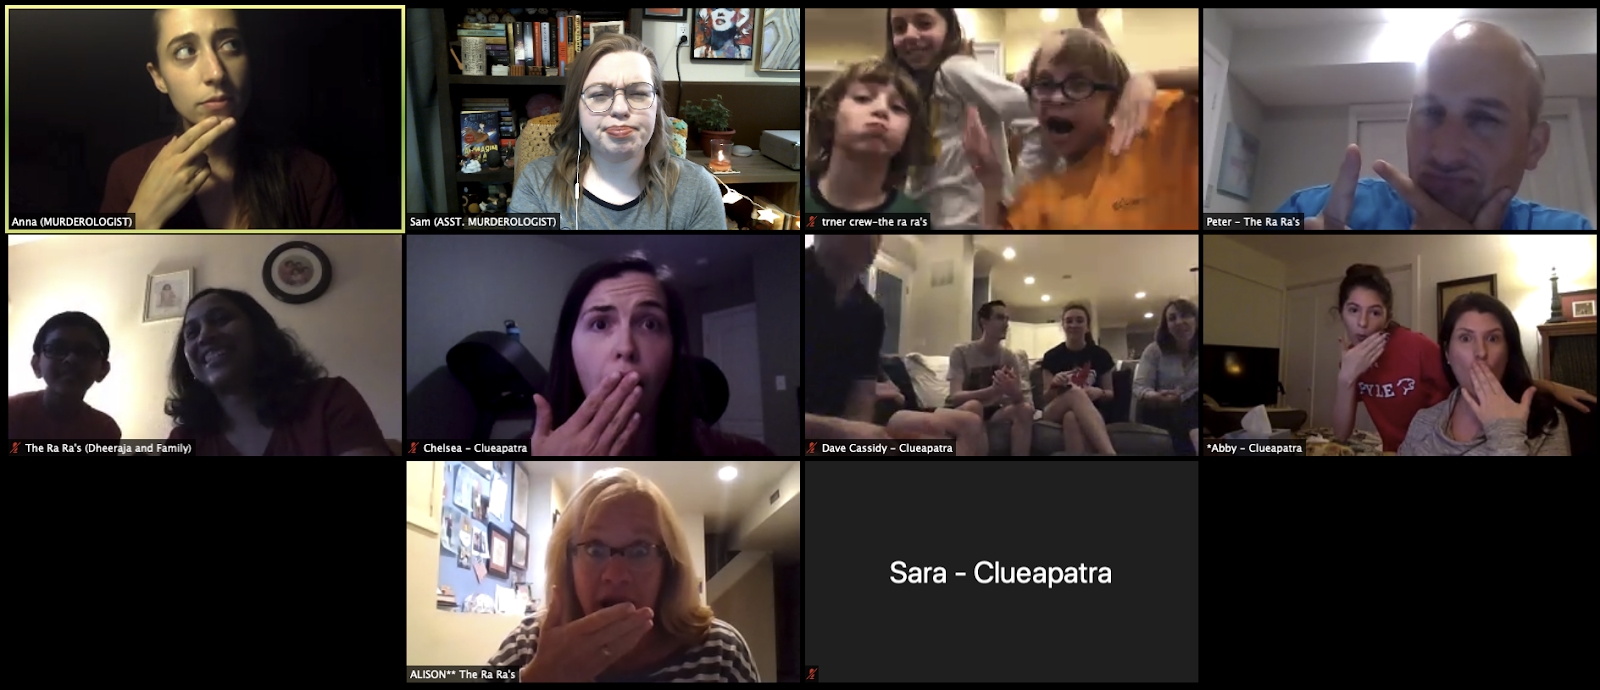 During the COVID-19 stay at home orders, TCGers stayed connected by having a virtual murder mystery night.